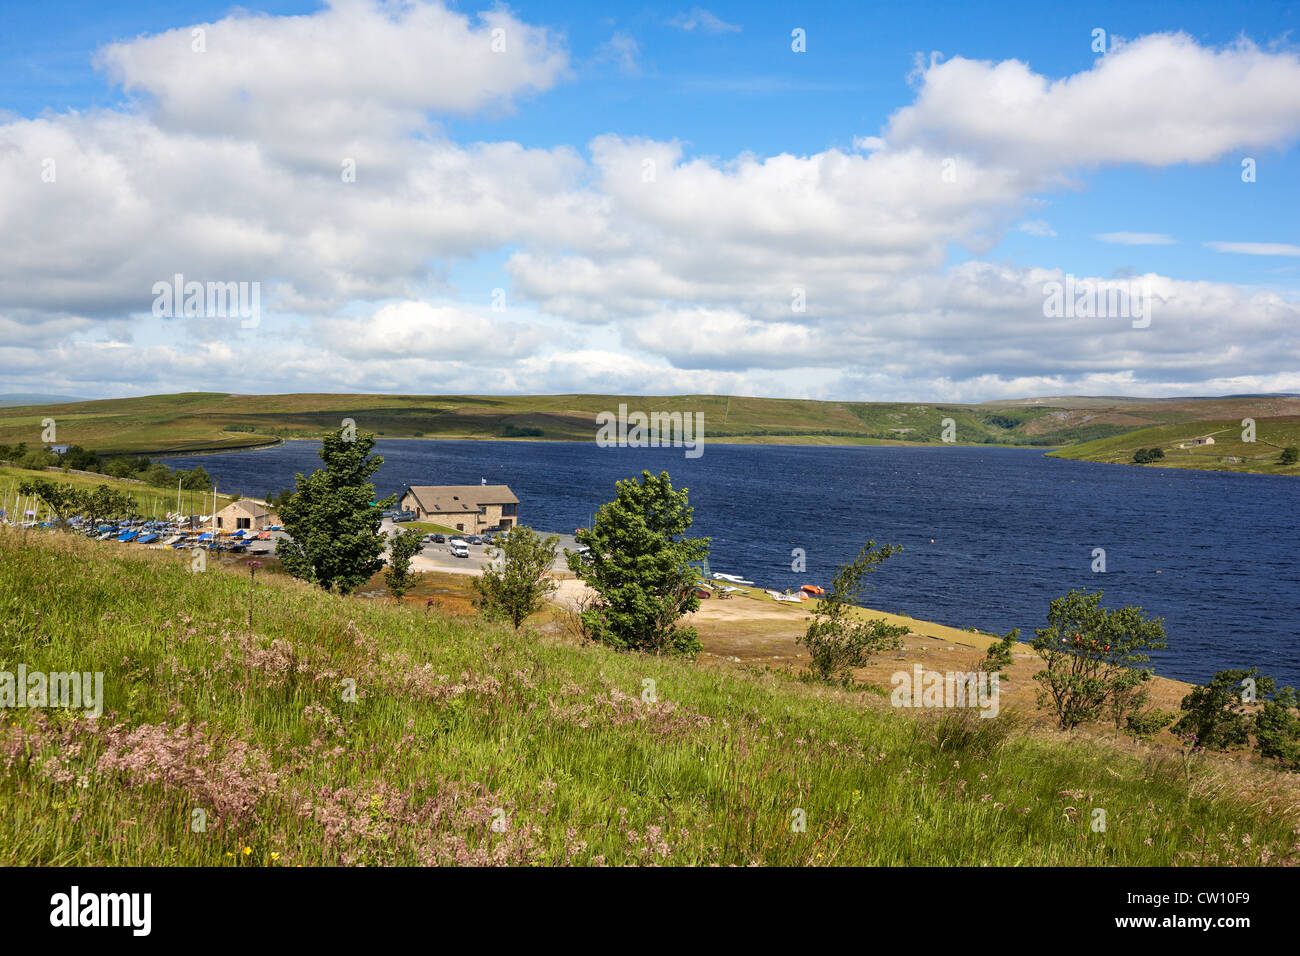 Grimwith Reservoir looking towards The Yorkshire Dales Sailing Club on the south shore. Stock Photo